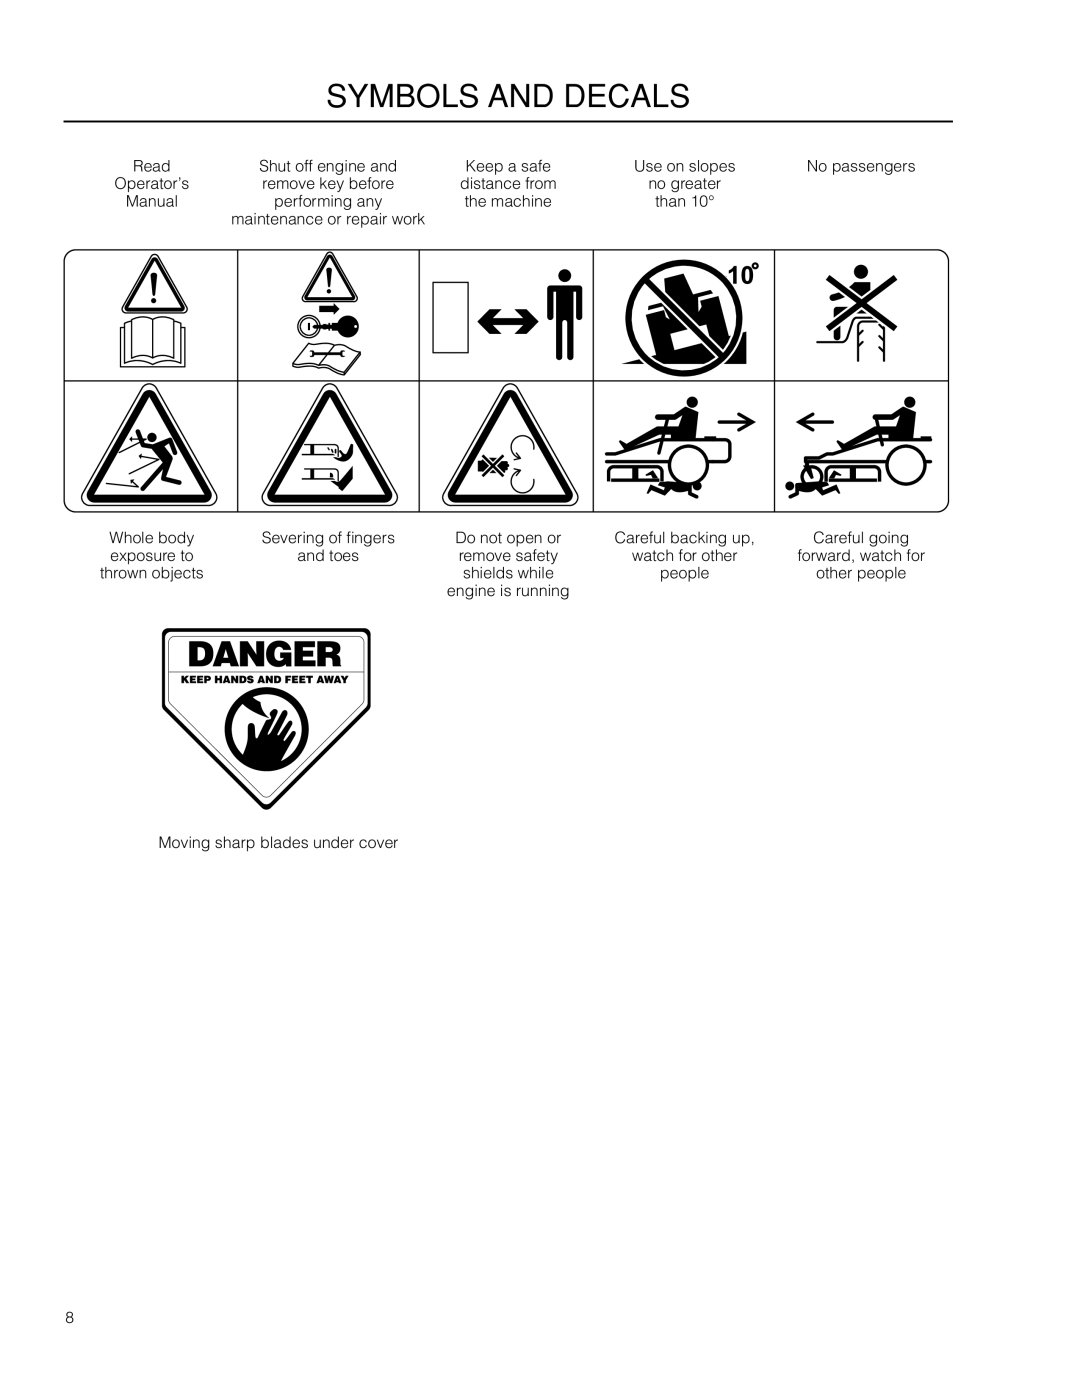 Dixon 115 338927R1 symbols and decals, remove key before, performing any, Whole body, Careful backing up, remove safety 